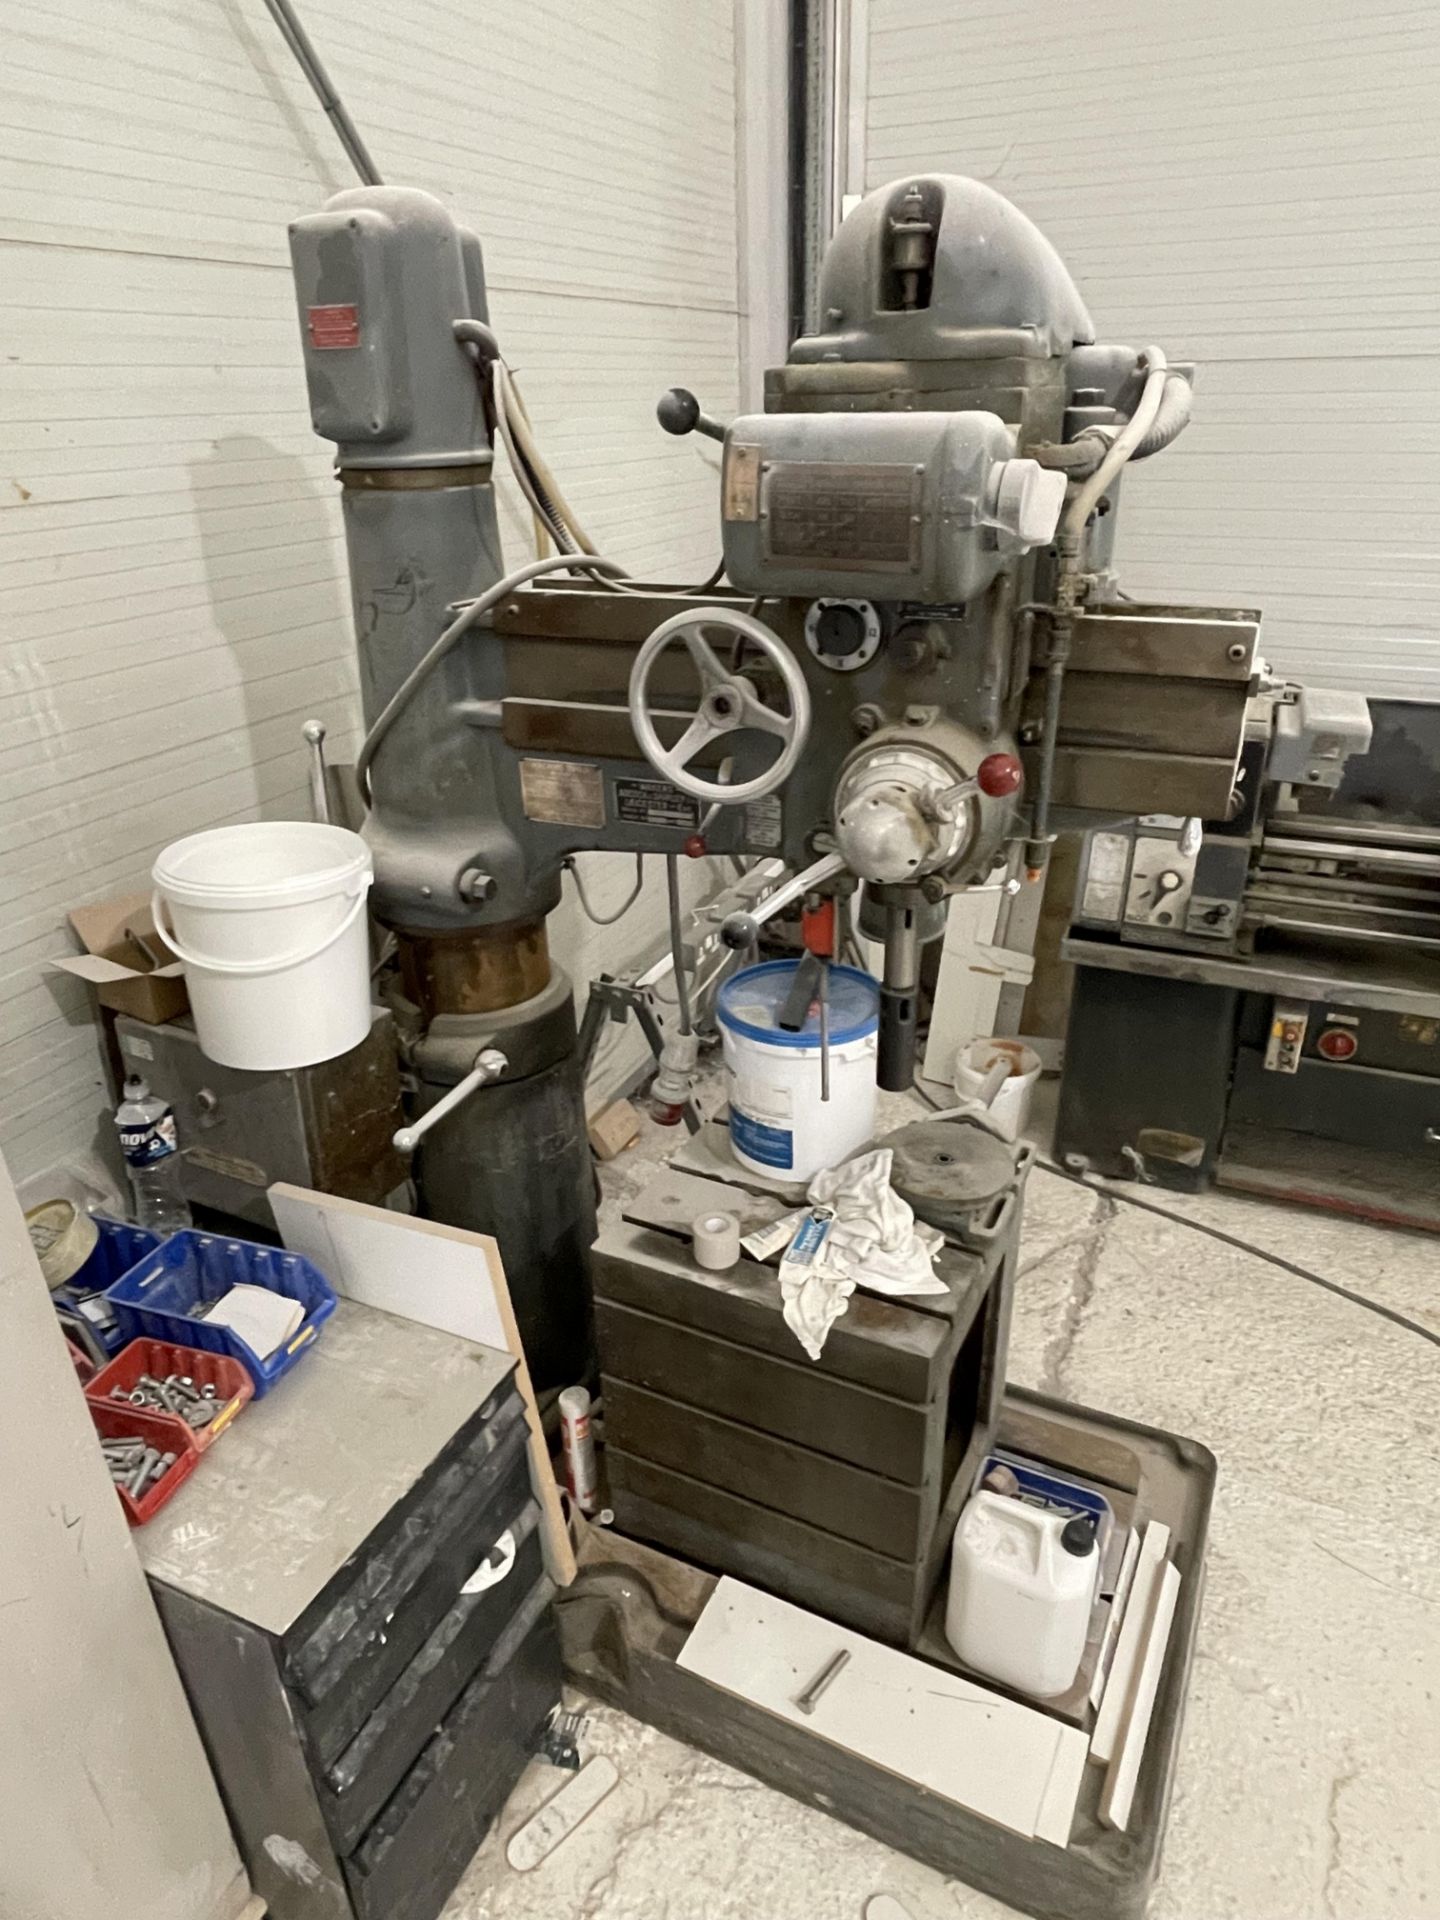 1963 Adcock & Shipley Radial Drill S/No. 3575D/140SV, 3-Phase with Machine Vice - Image 2 of 7